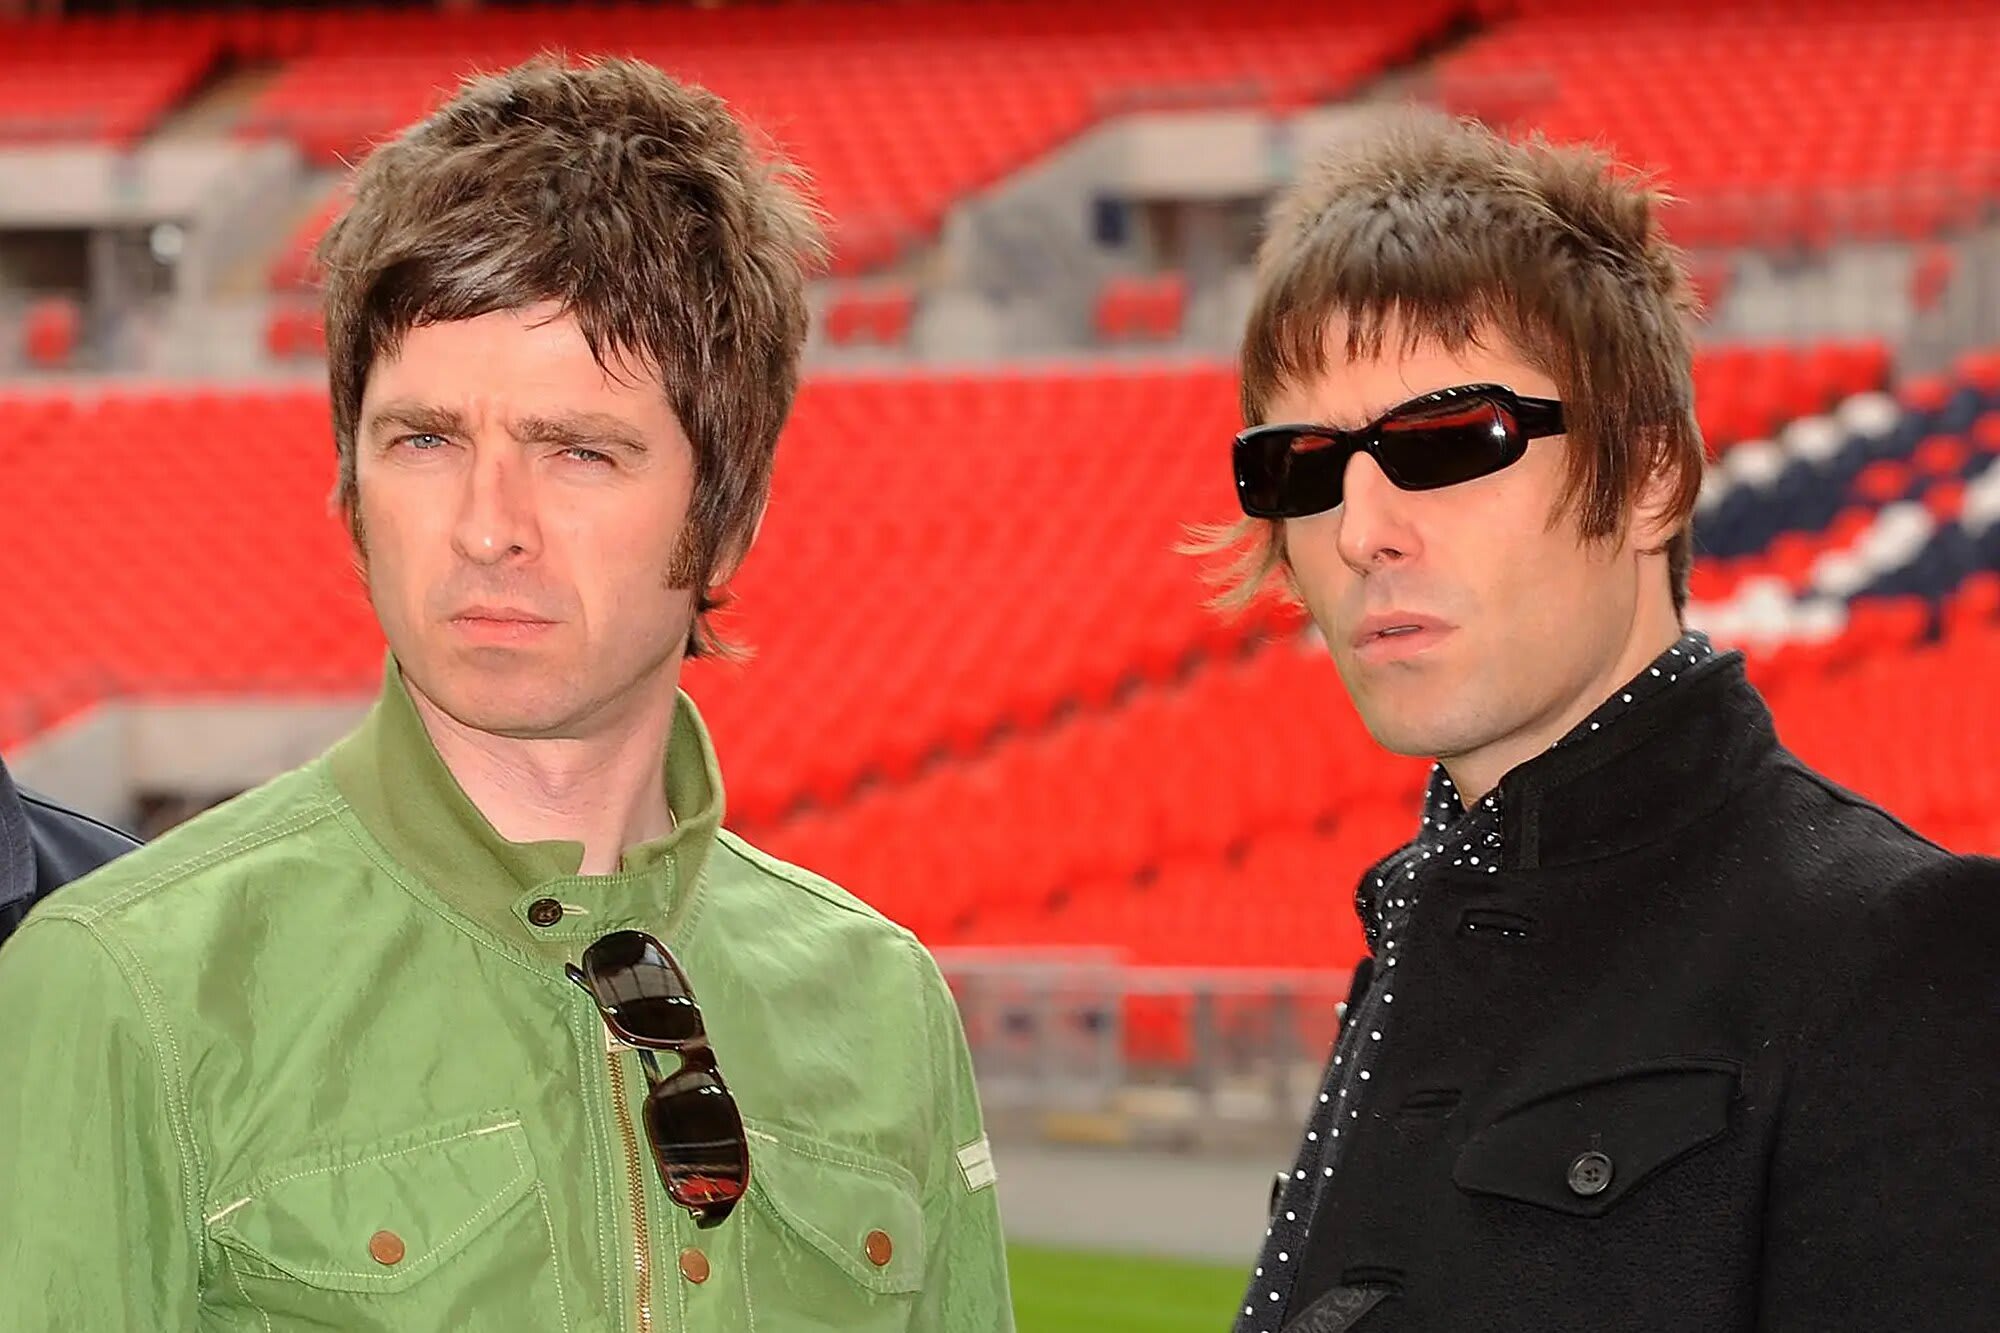 Why did Oasis split up?